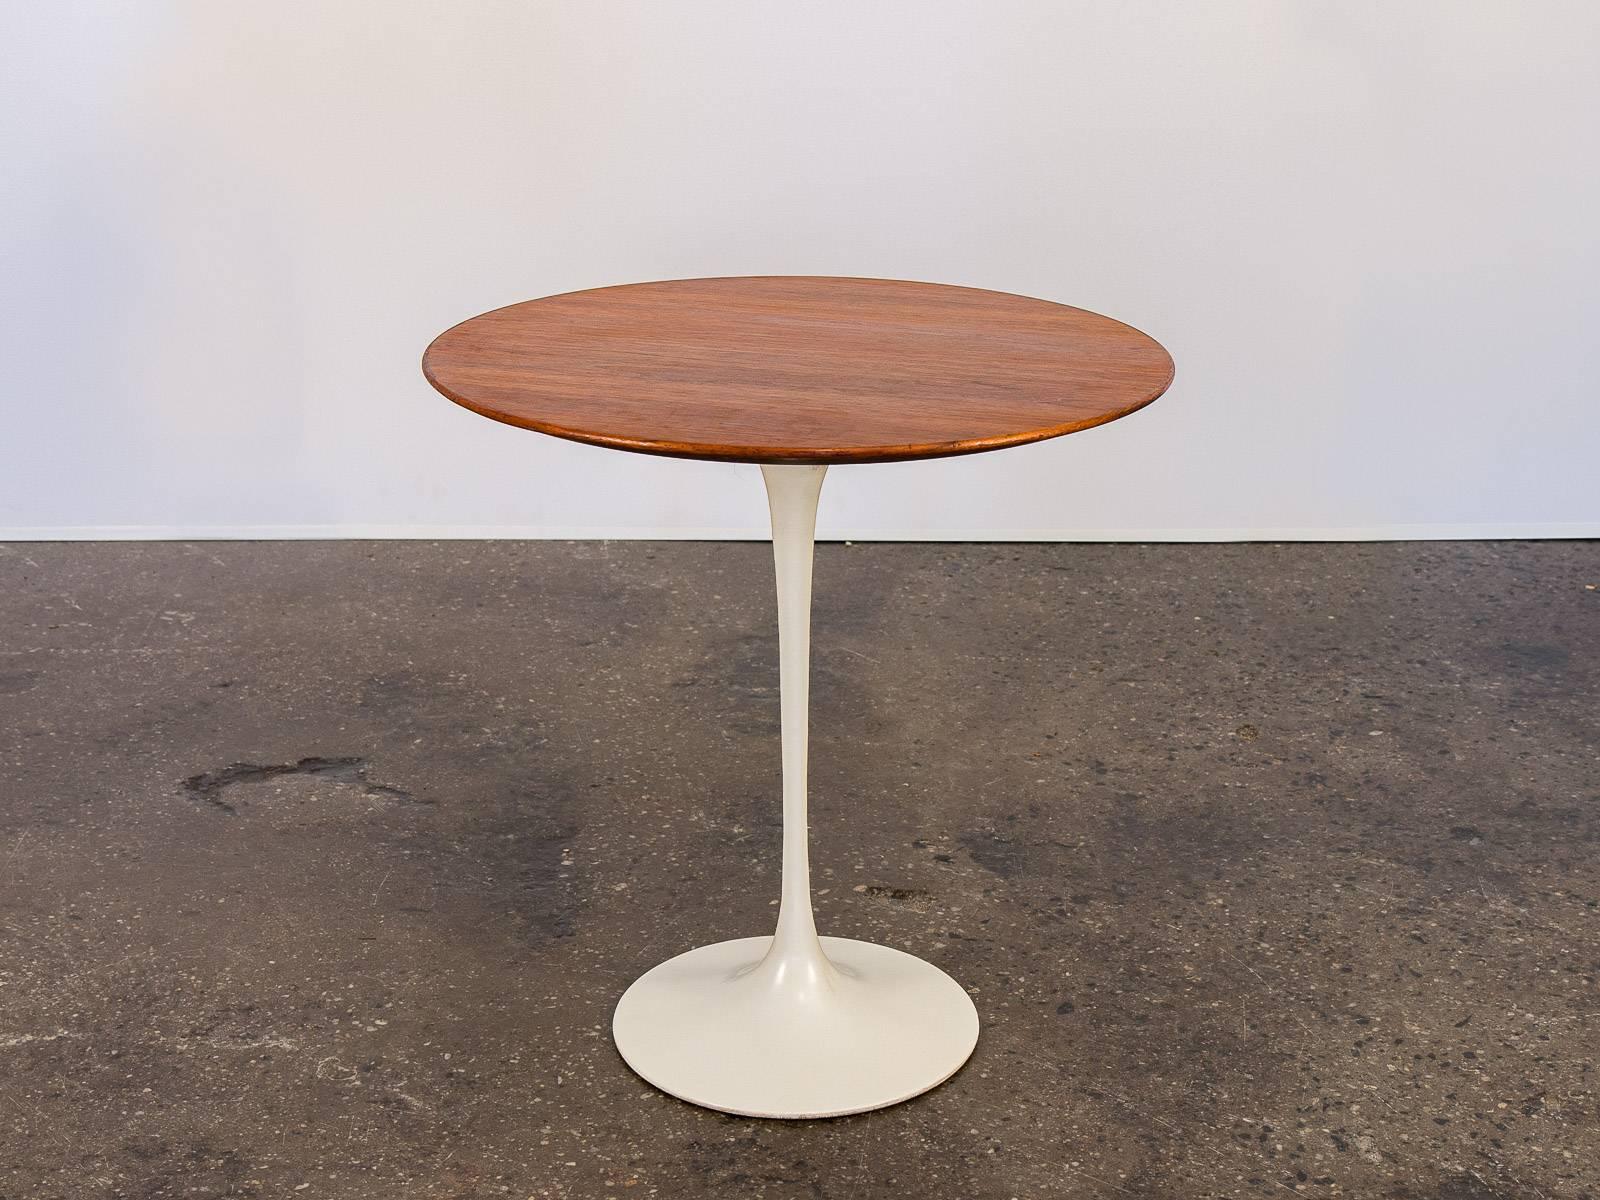 1970s Eero Saarinen tulip side table in walnut for Knoll. This petite version of the large Saarinen Tulip dining table echoes the organic, drop of liquid form. Despite the size, this side table maintains it's center of gravity, substantial weight